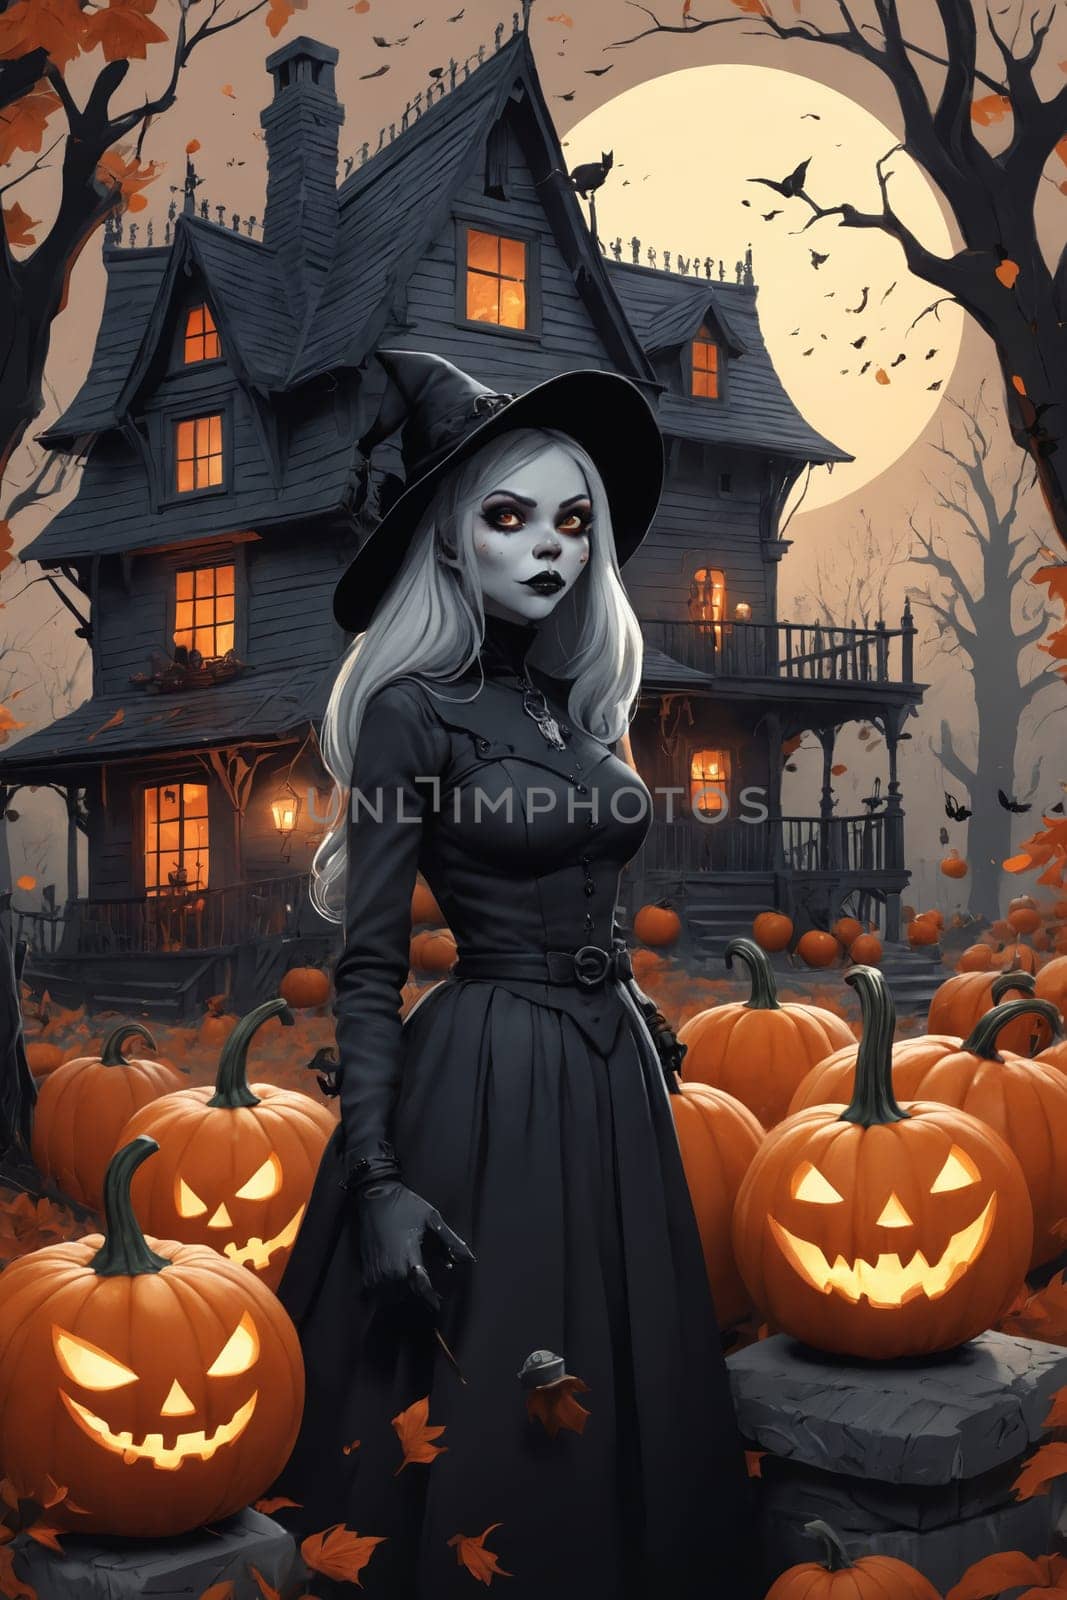 Spooky Elegance: A Witch's Halloween Night Near a Haunted House by Andre1ns